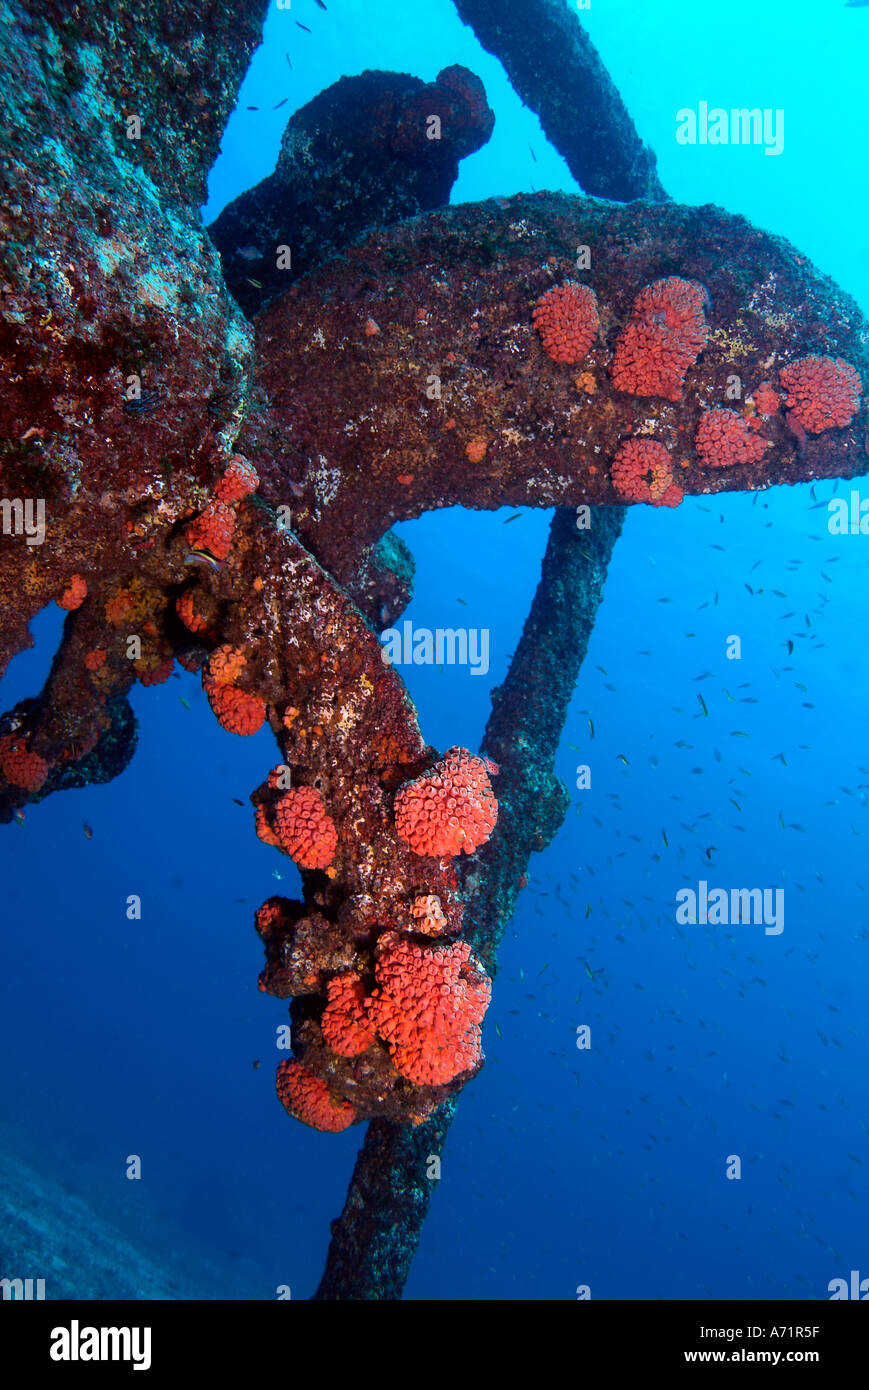 Propeller of a big wreck sunk in the Sea of Cortez Stock Photo